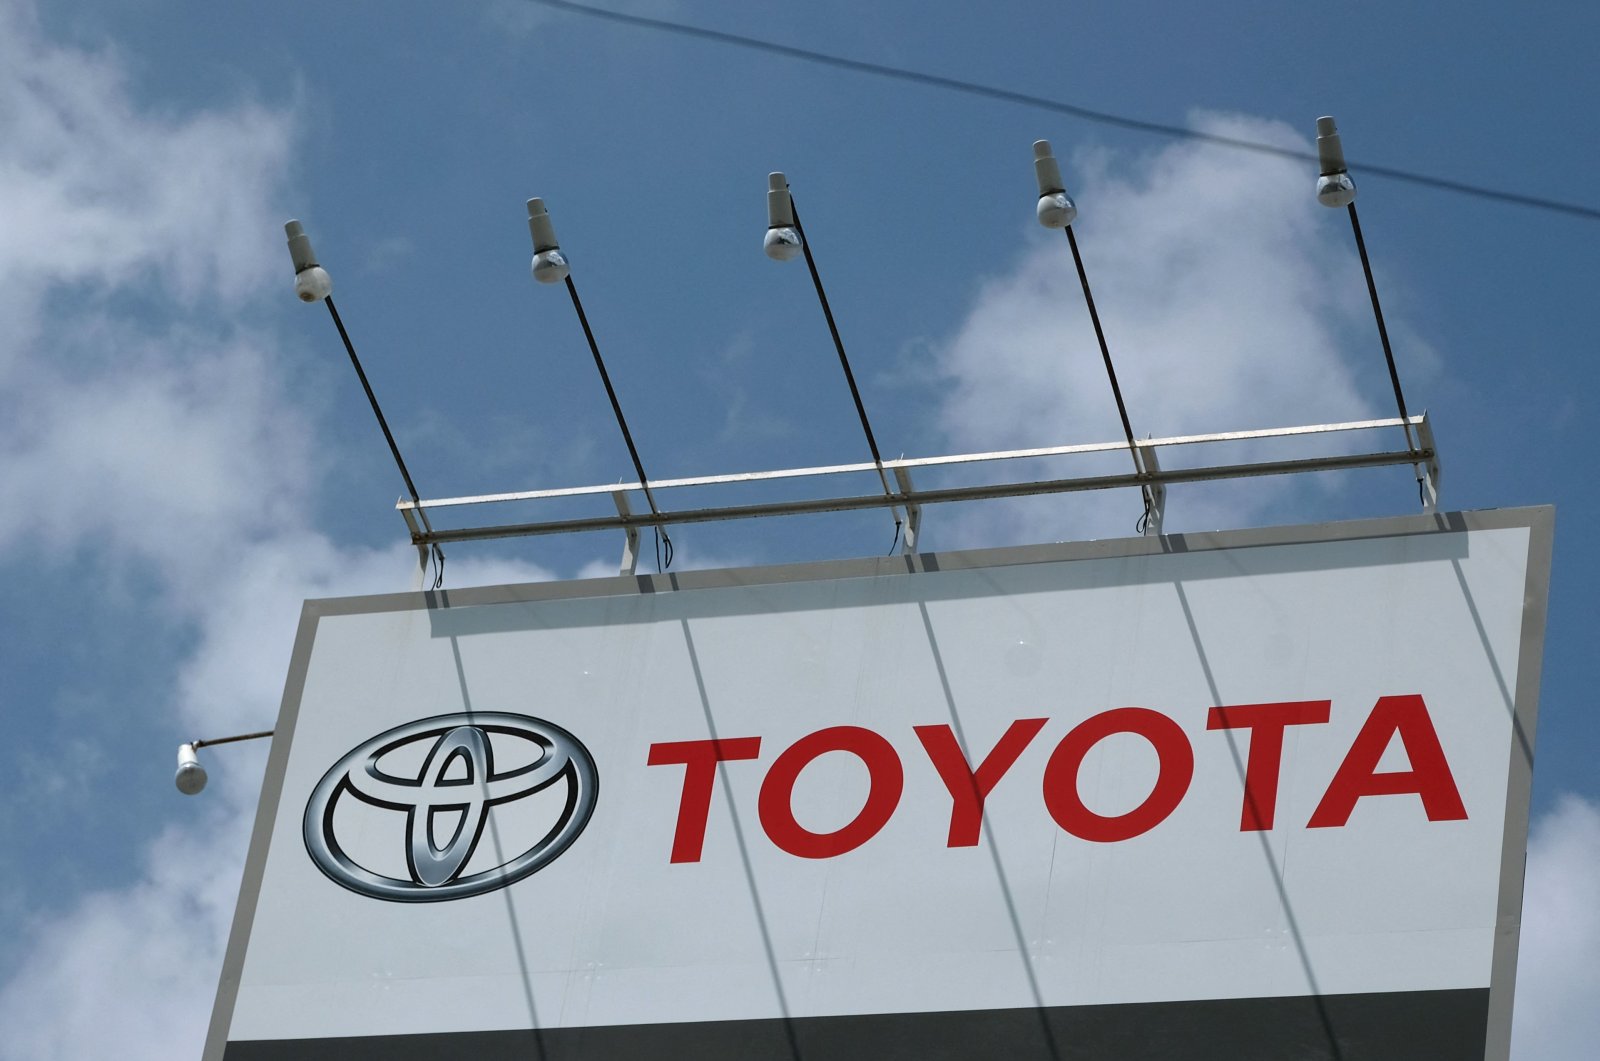 The logo of Japan's Toyota Motor at a company dealership in Tokyo, Japan, Aug. 6, 2020. The world's top-selling carmaker Toyota has come joint last in a Greenpeace ranking of carbon emission efforts by auto firms, according to a list published on Nov. 4, 2021, during the COP26 climate summit. (AFP Photo)